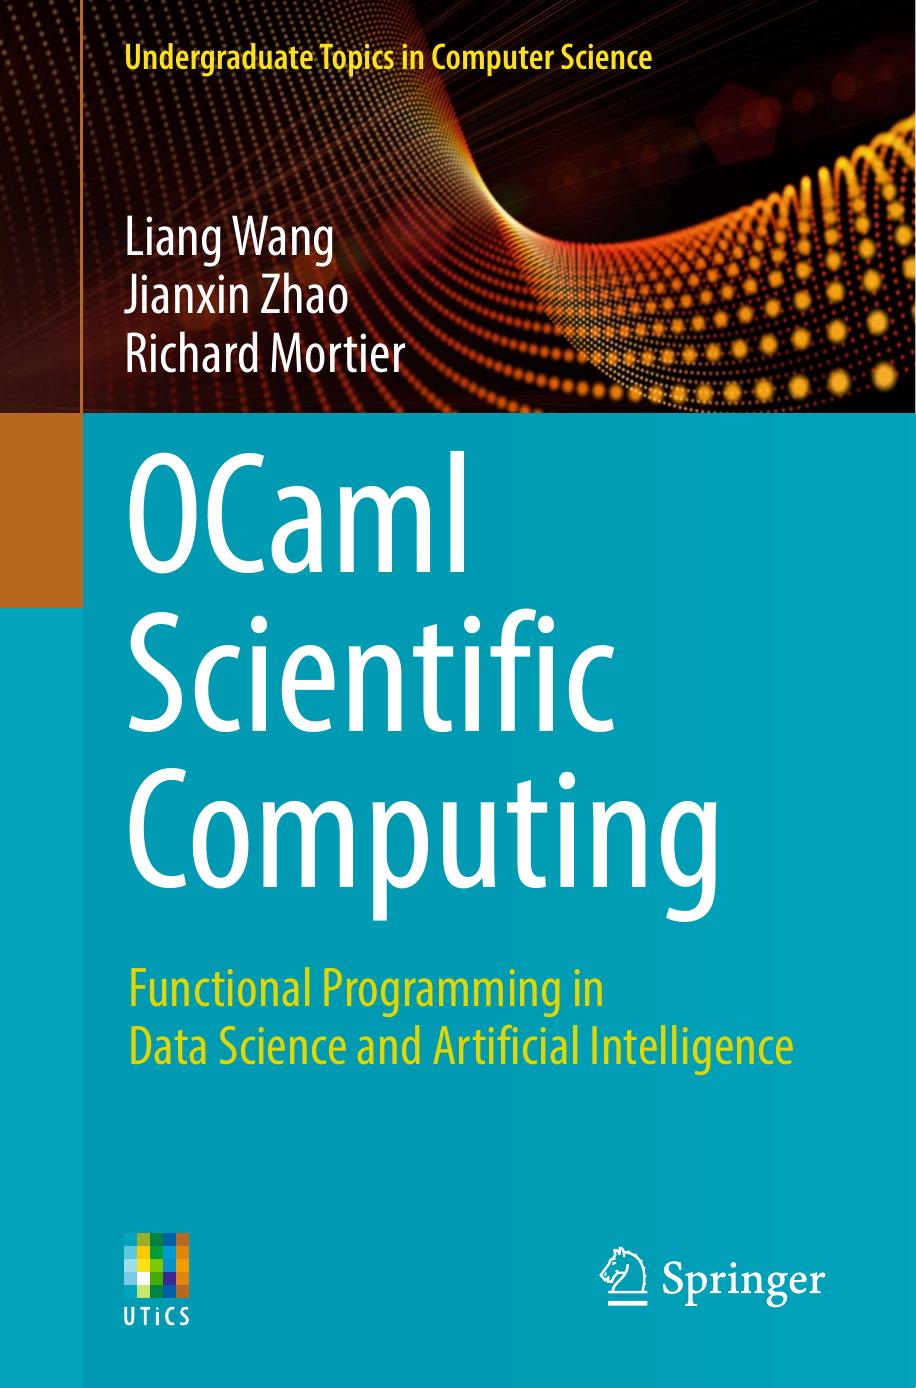 OCaml Scientific Computing  Functional Programming in Data Science and Artificial Intelligence, (2022